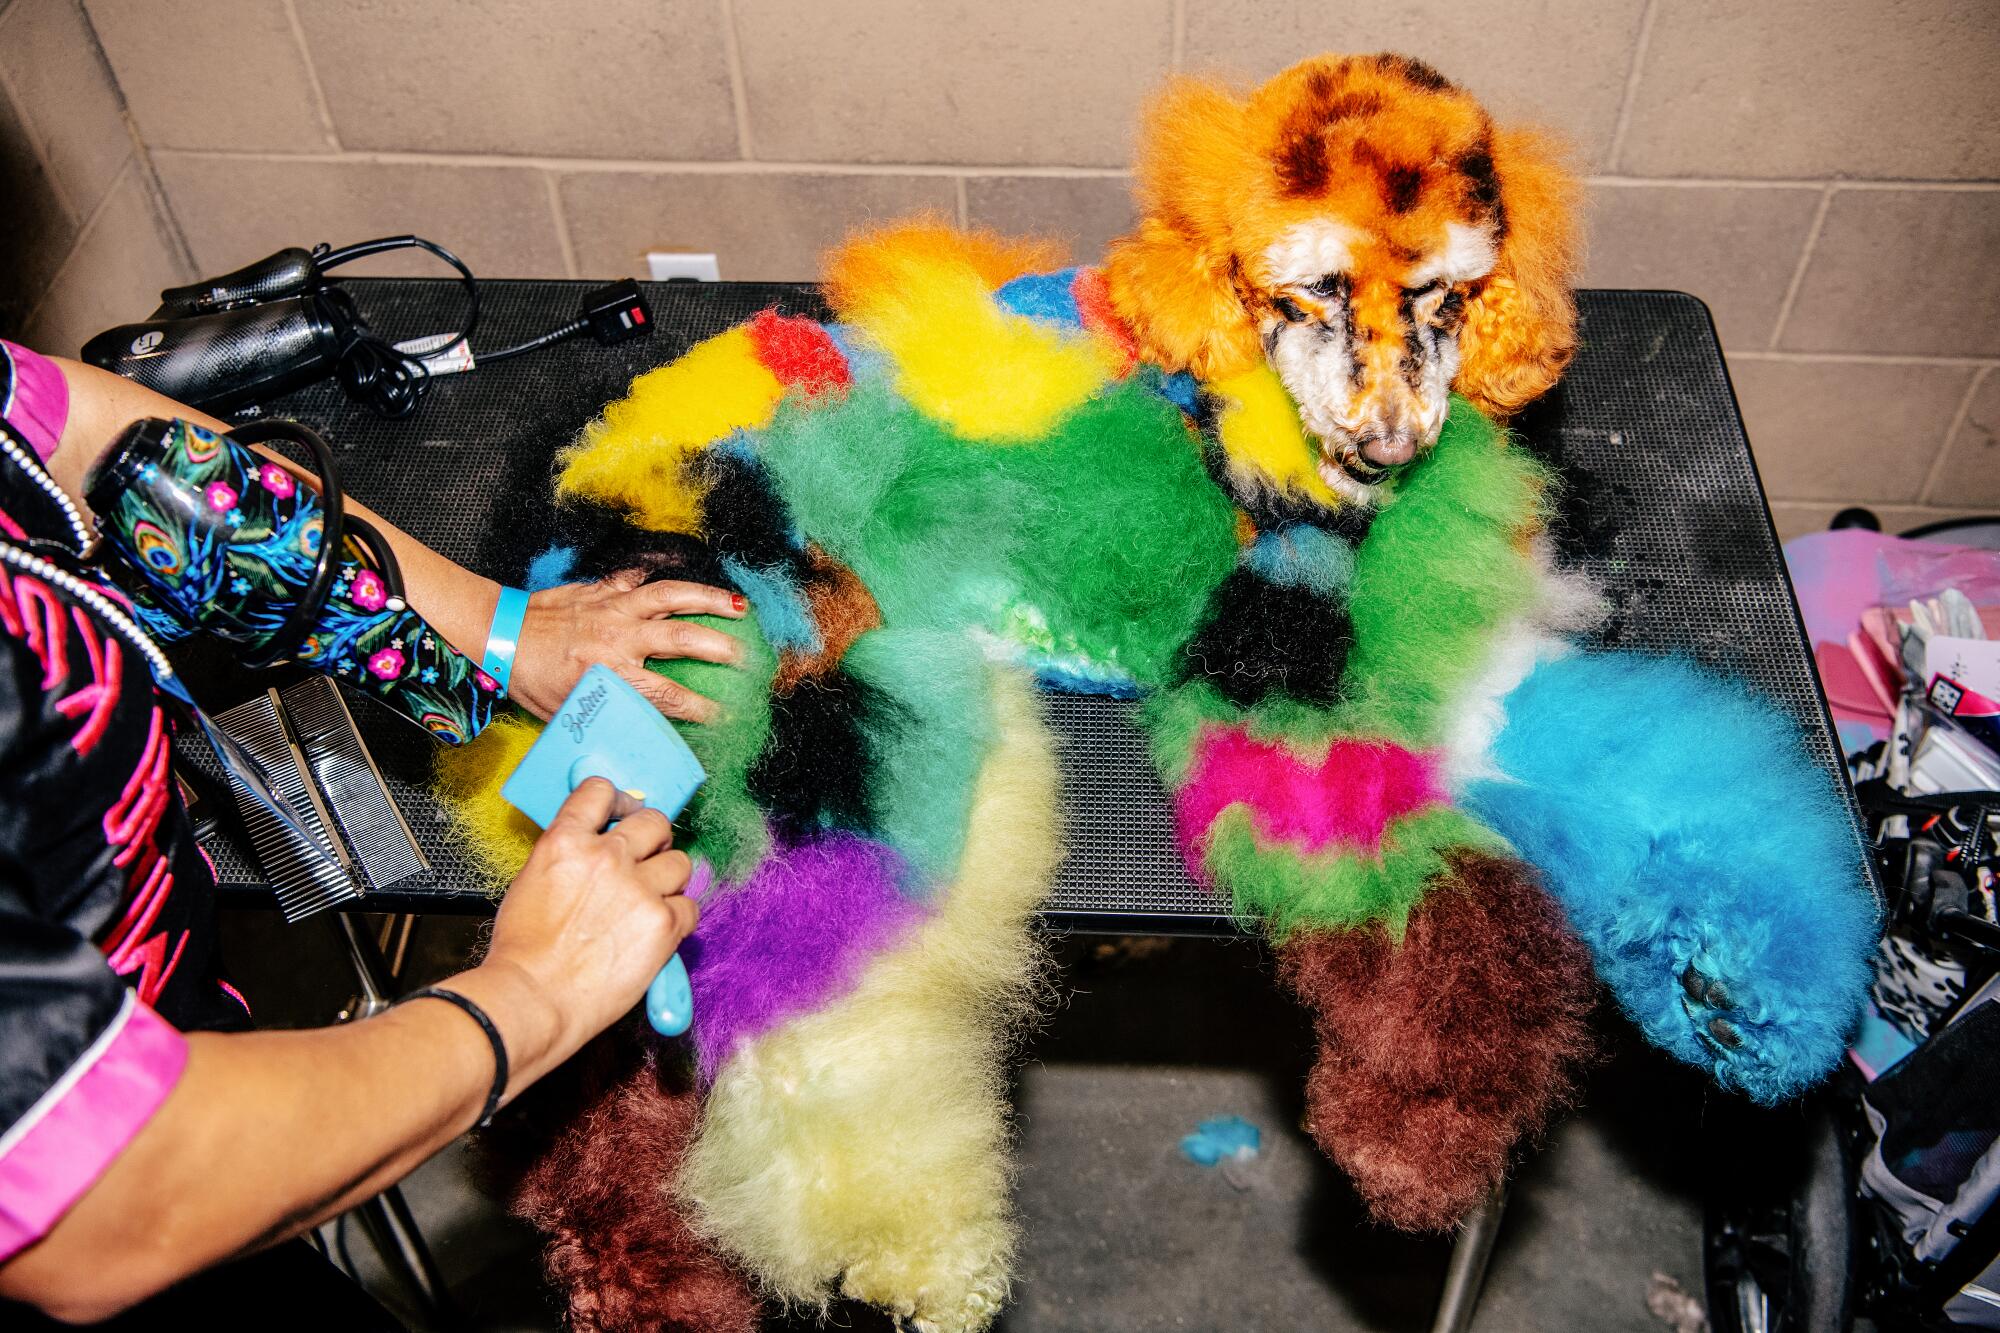 Saphira relaxes as she’s brushed and prepped backstage before the the Creative Styling Contest 